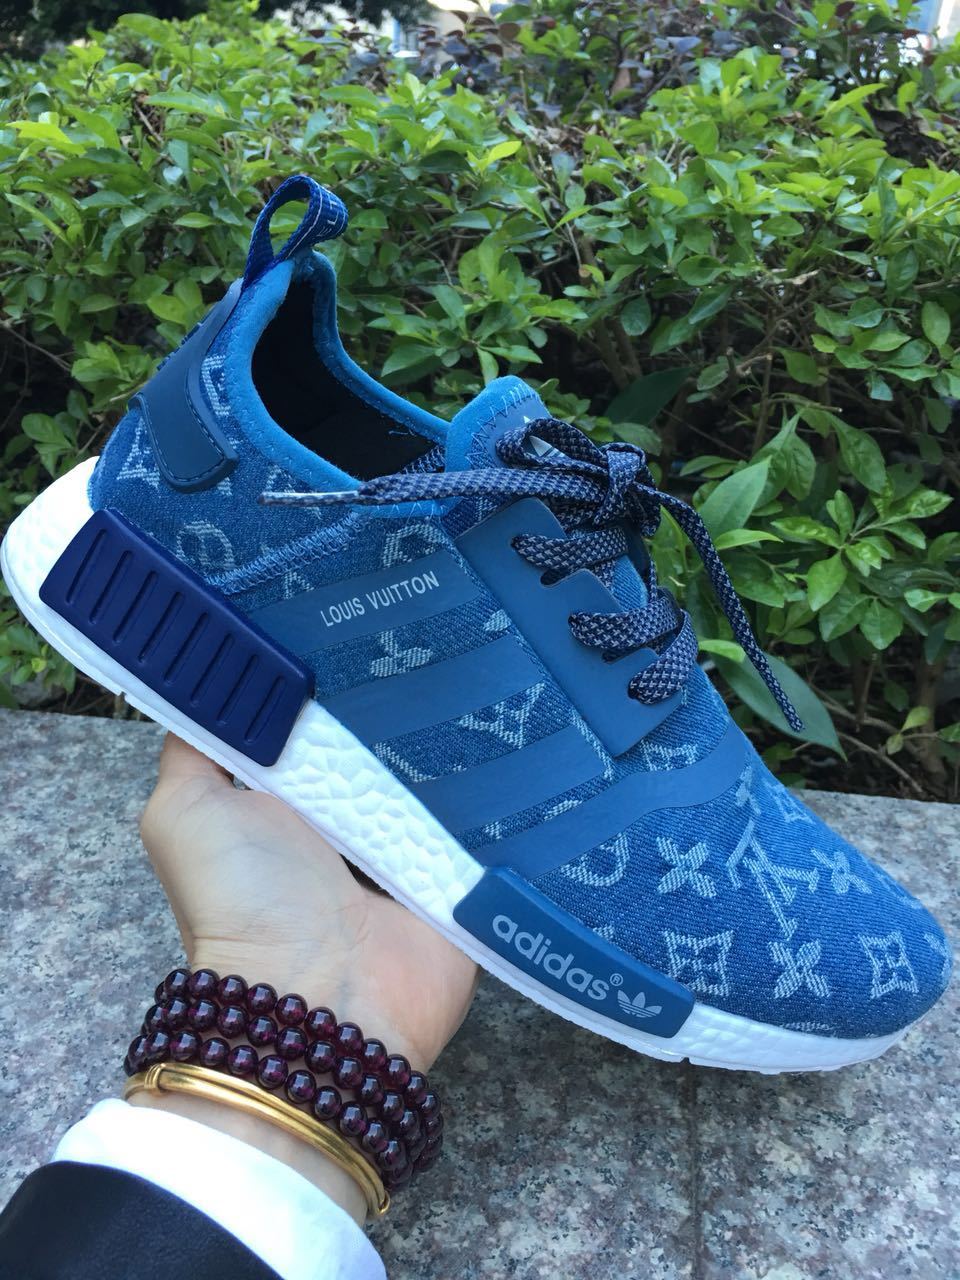 LV x Adidas NMD Light Blue – Sally House of Fashion | Buy Your Latest Fashion Today